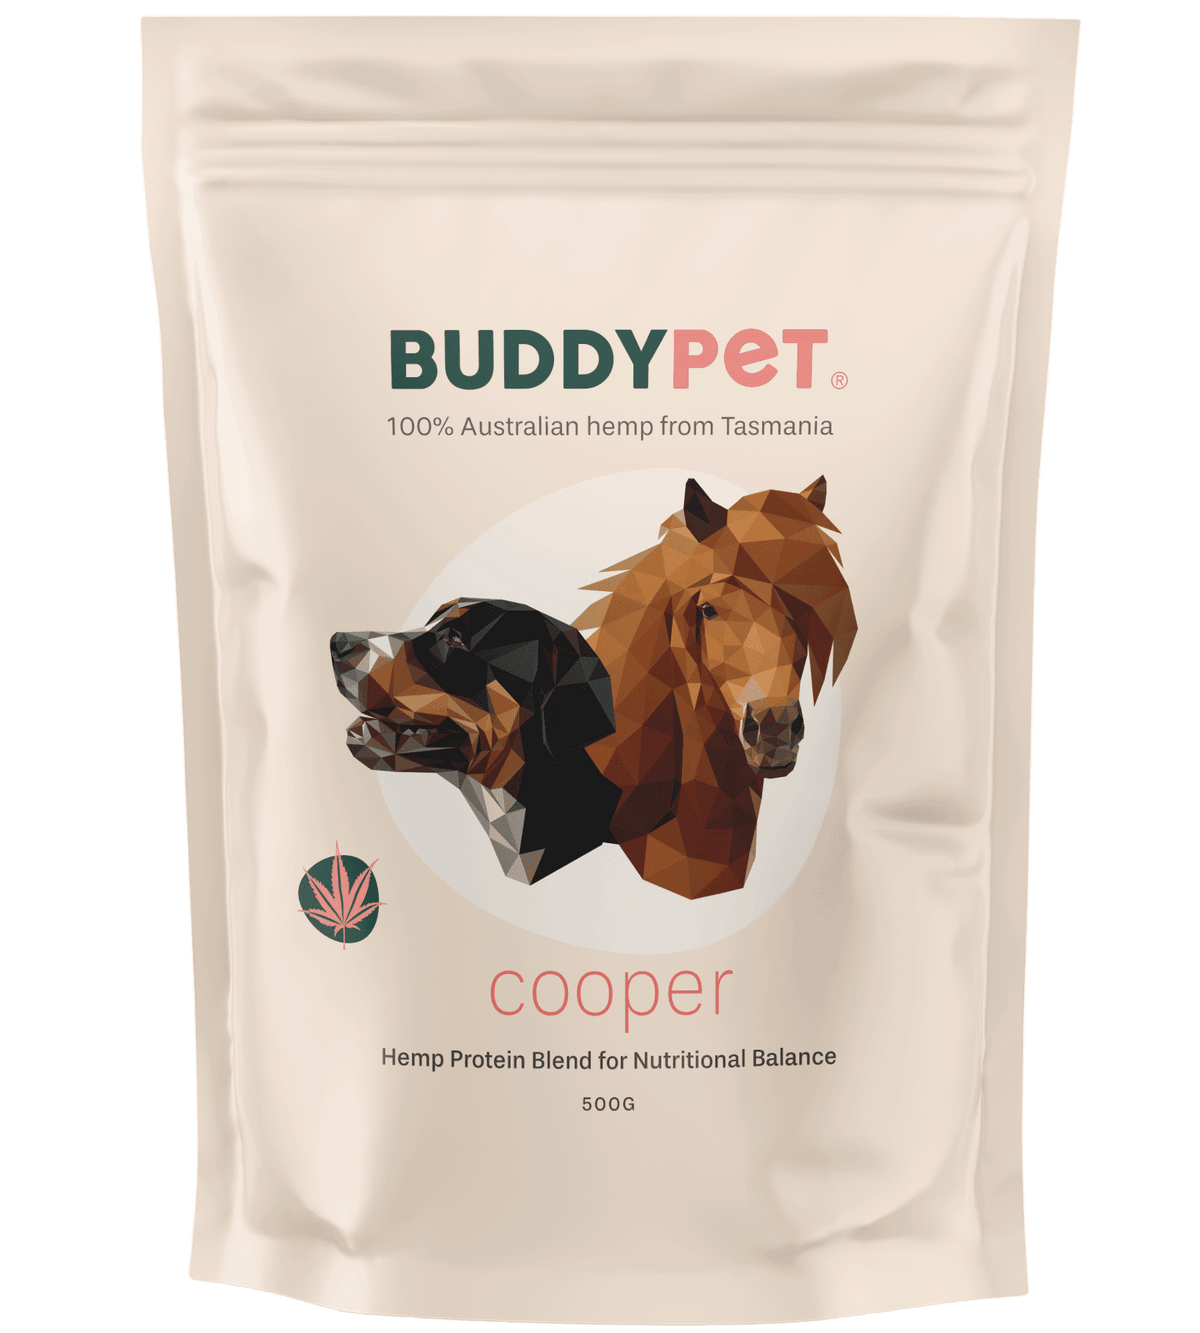 BUDDYPET Hemp Protein for Dogs